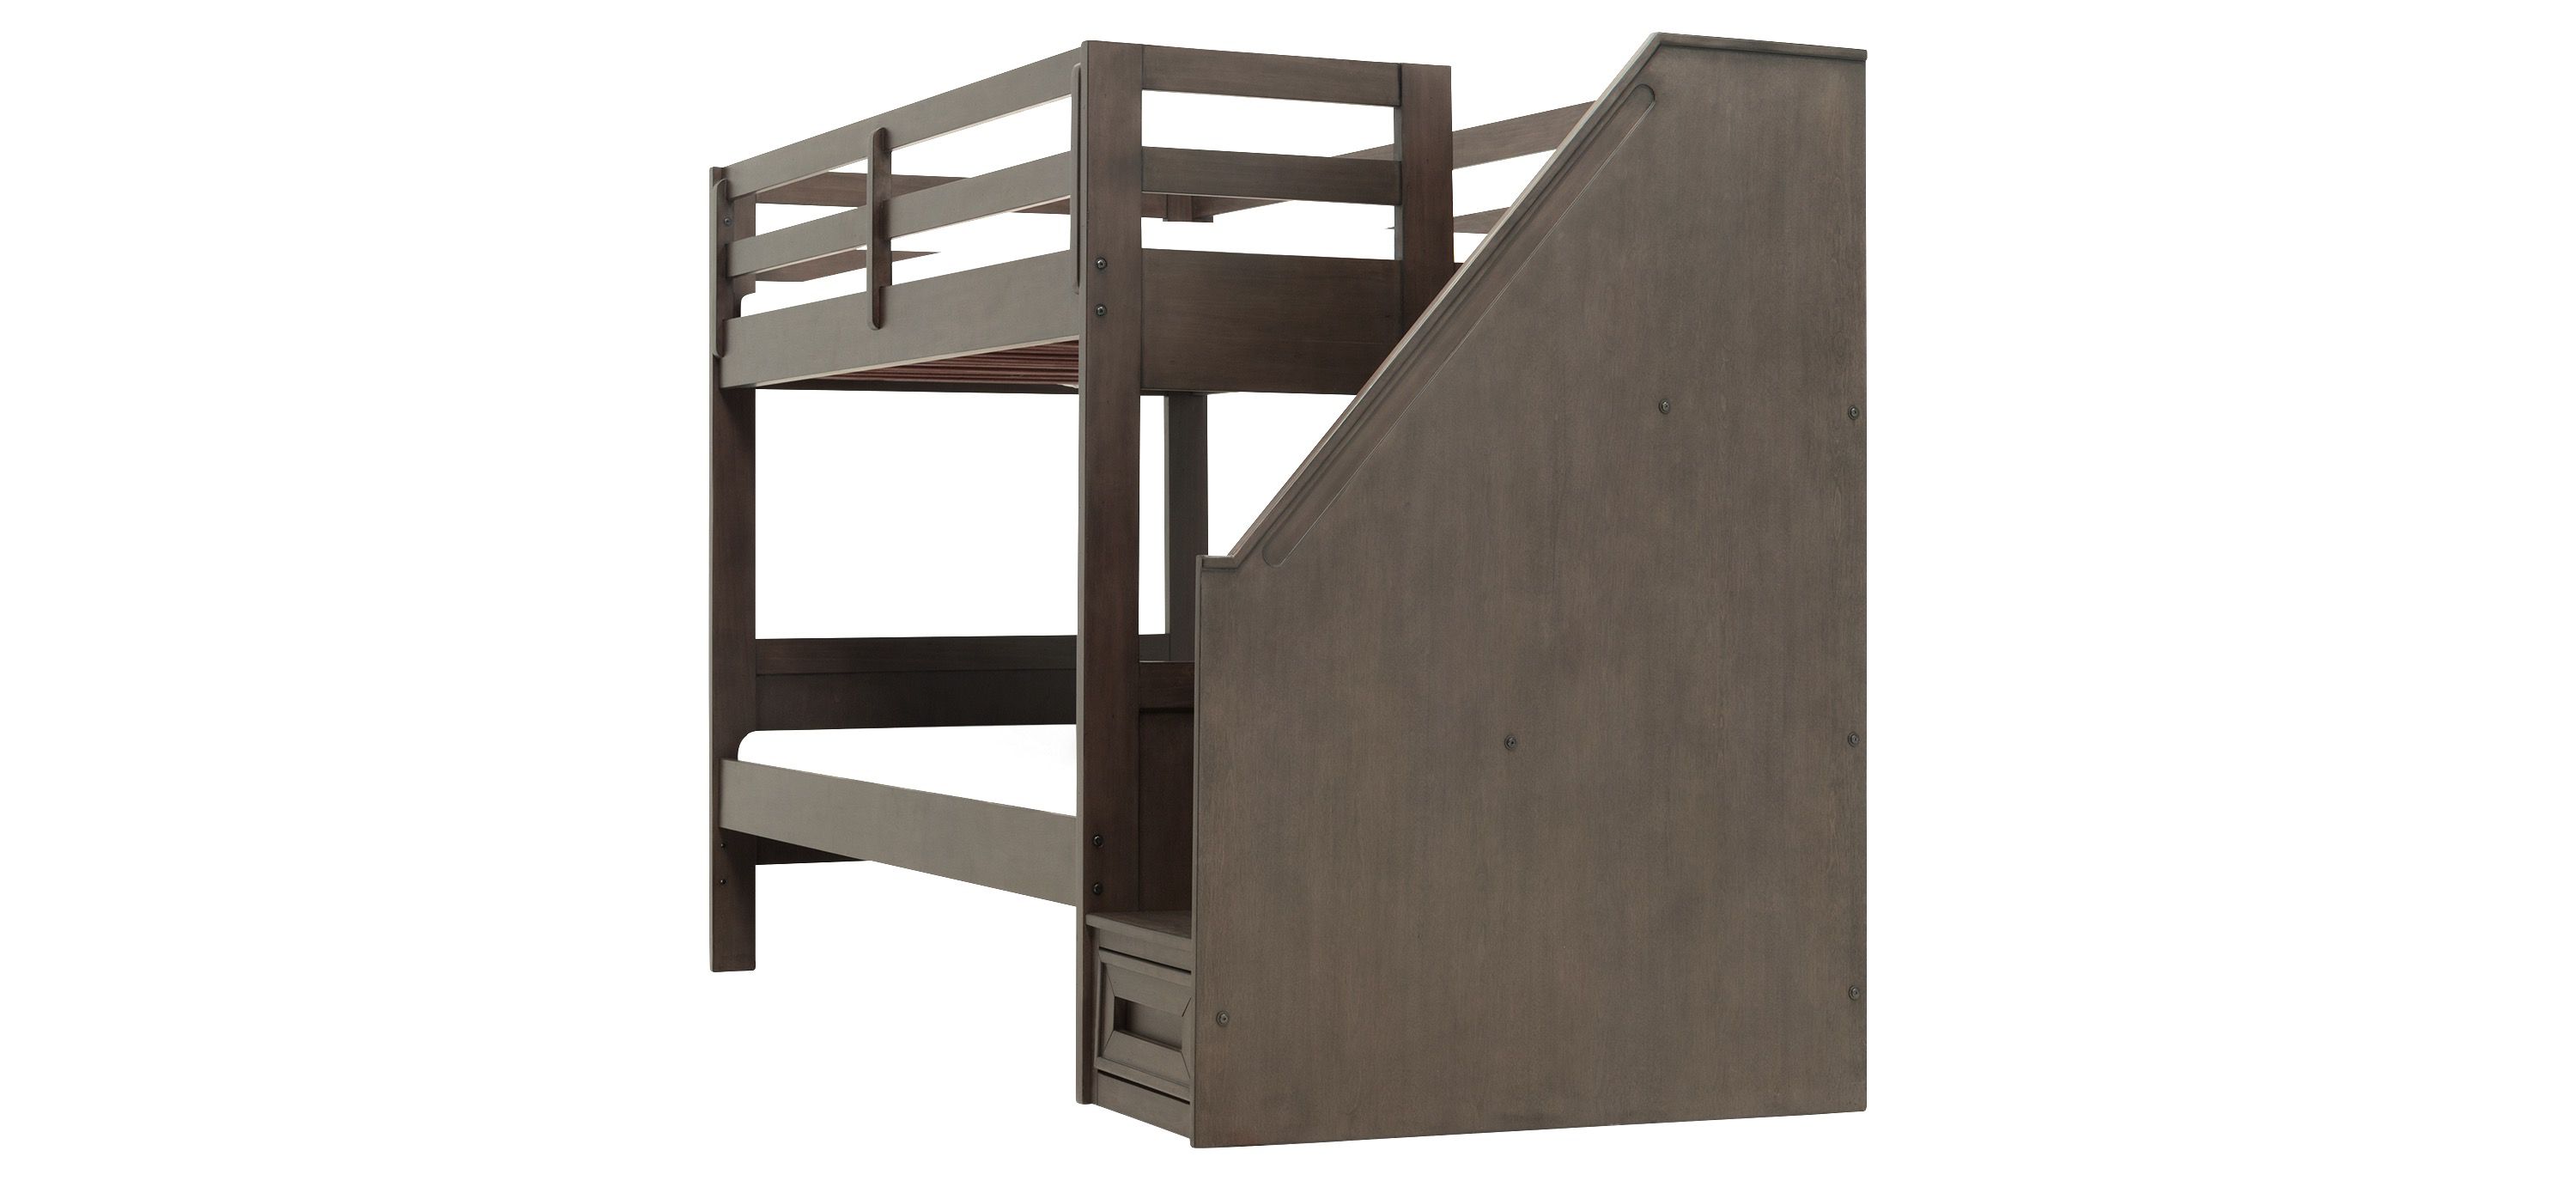 raymour and flanigan loft bed